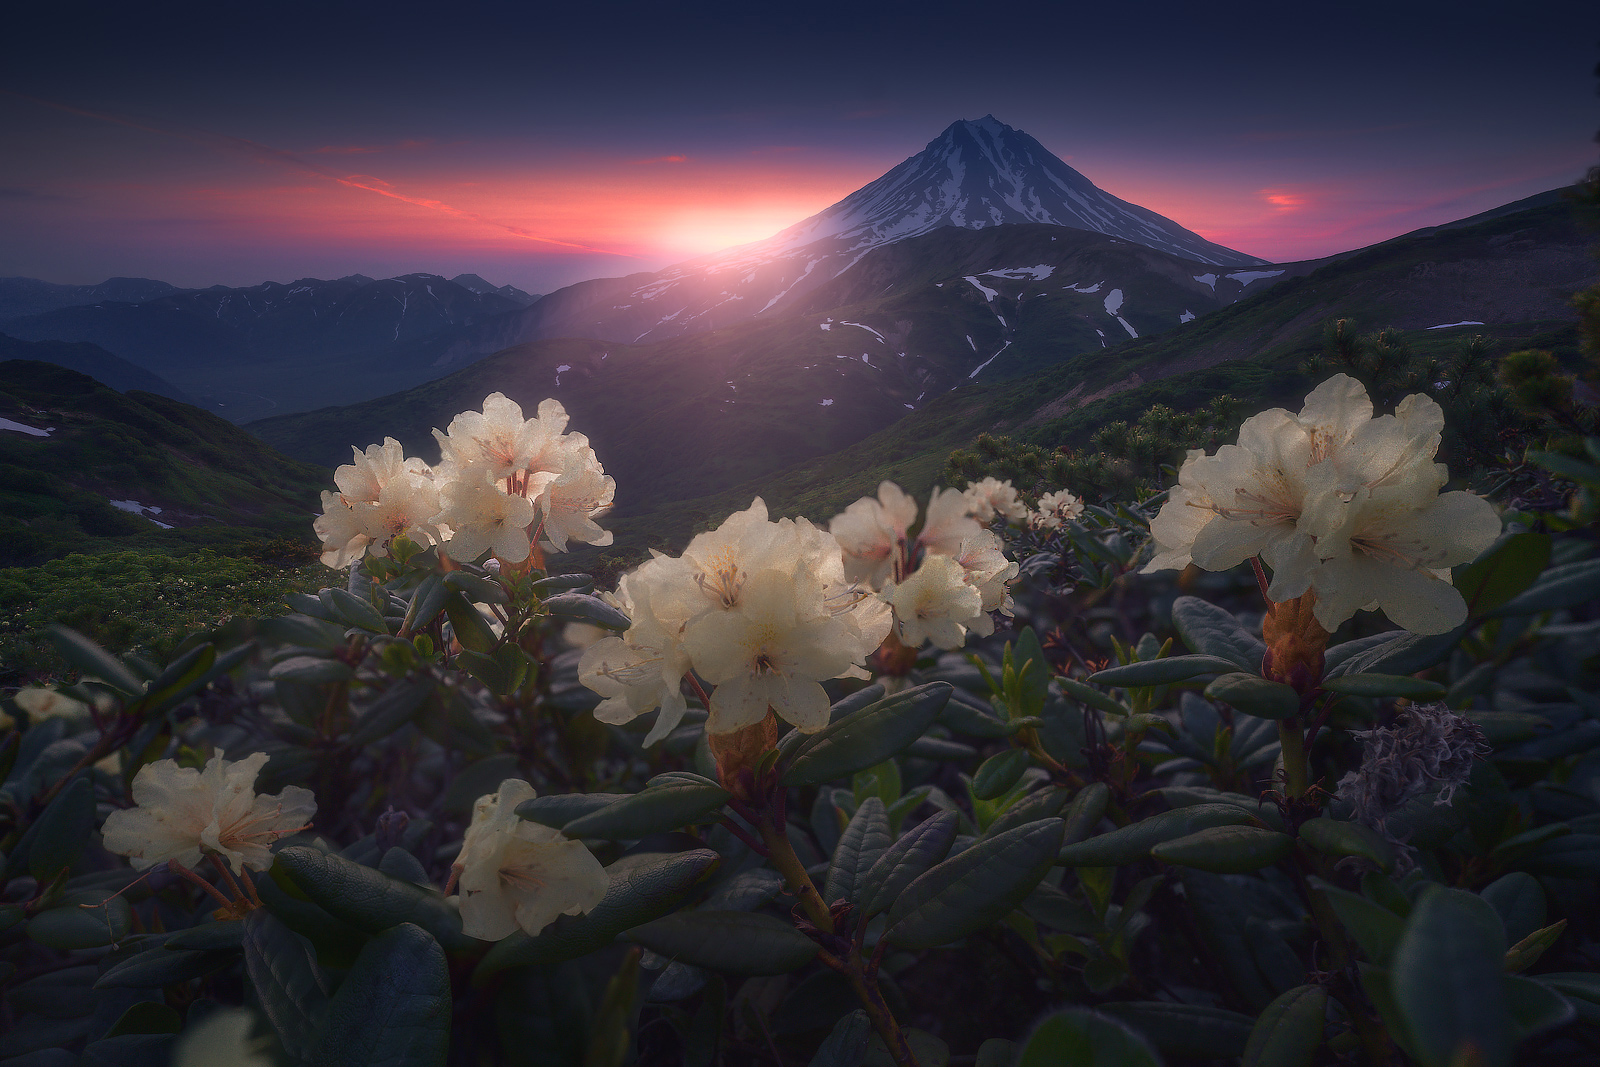 General 1600x1067 mountains flowers sunset snowy peak sunset glow snow nature closeup sky clouds leaves landscape